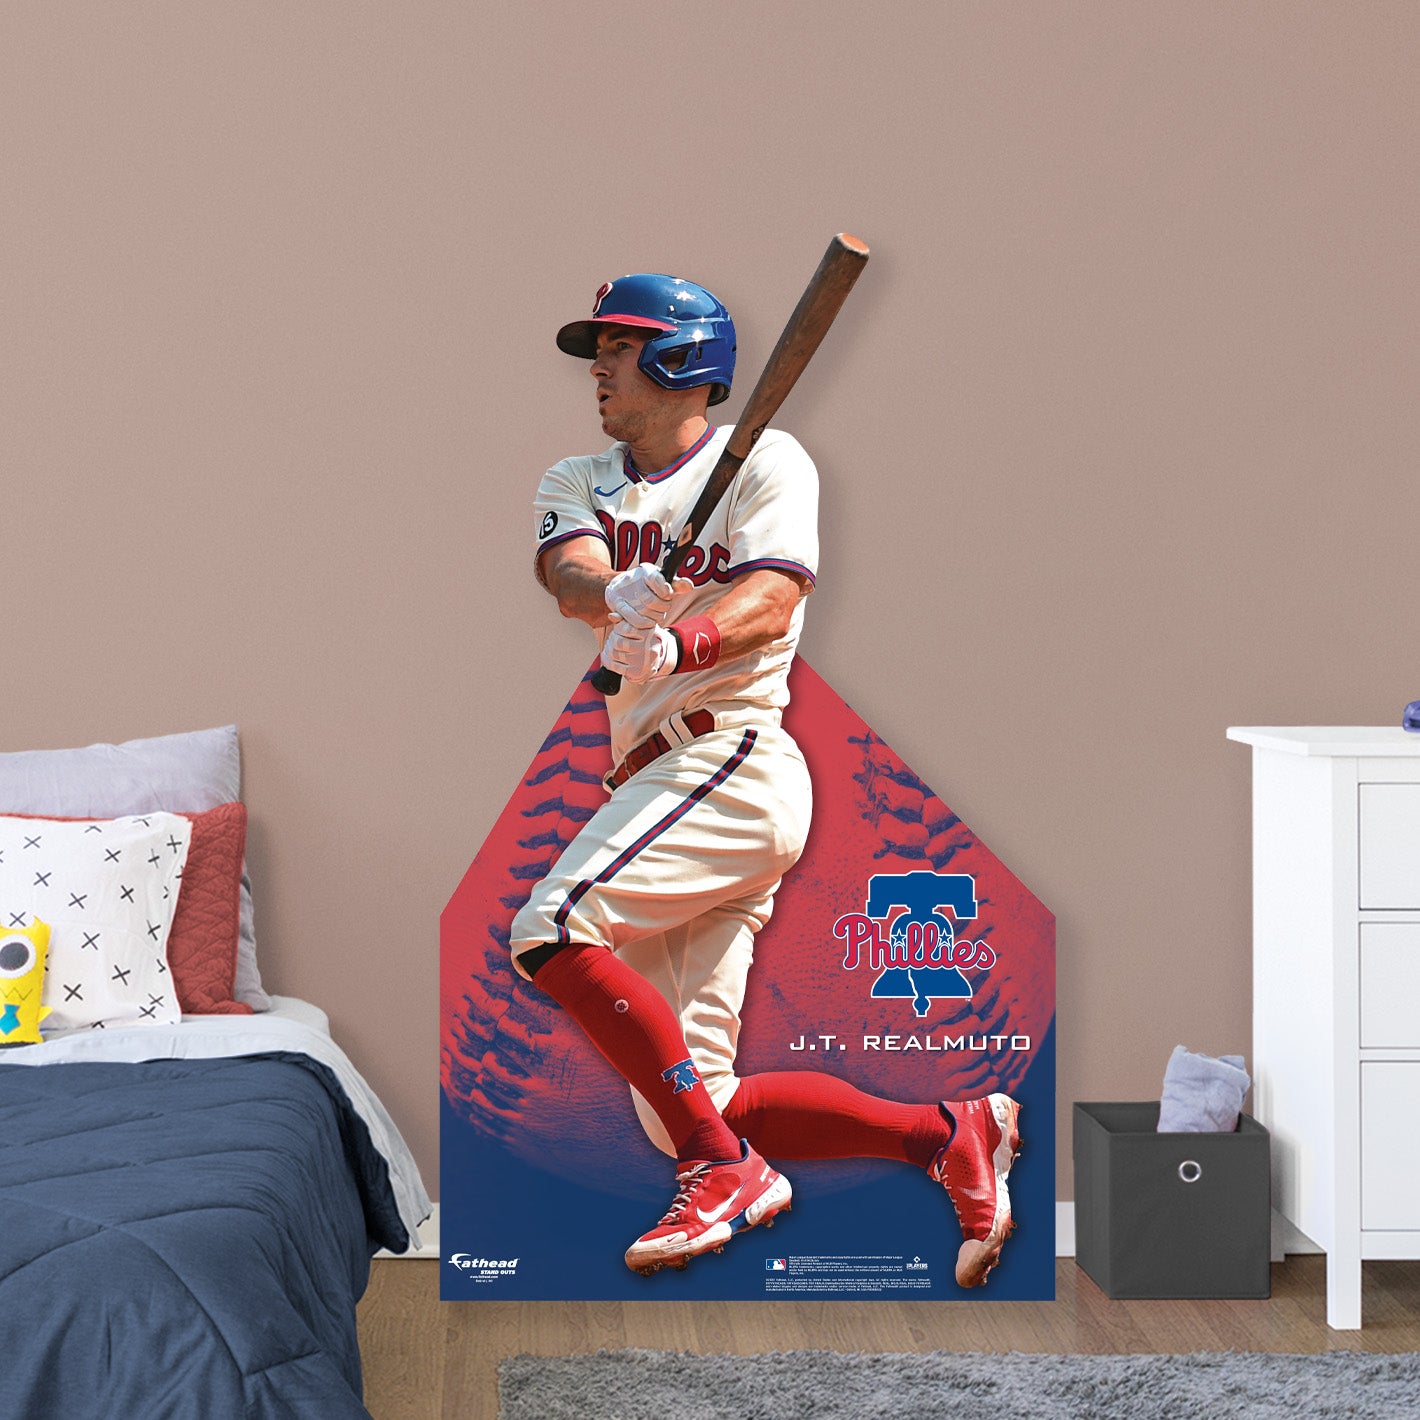 Philadelphia Phillies: J.T. Realmuto 2022  Life-Size   Foam Core Cutout  - Officially Licensed MLB    Stand Out